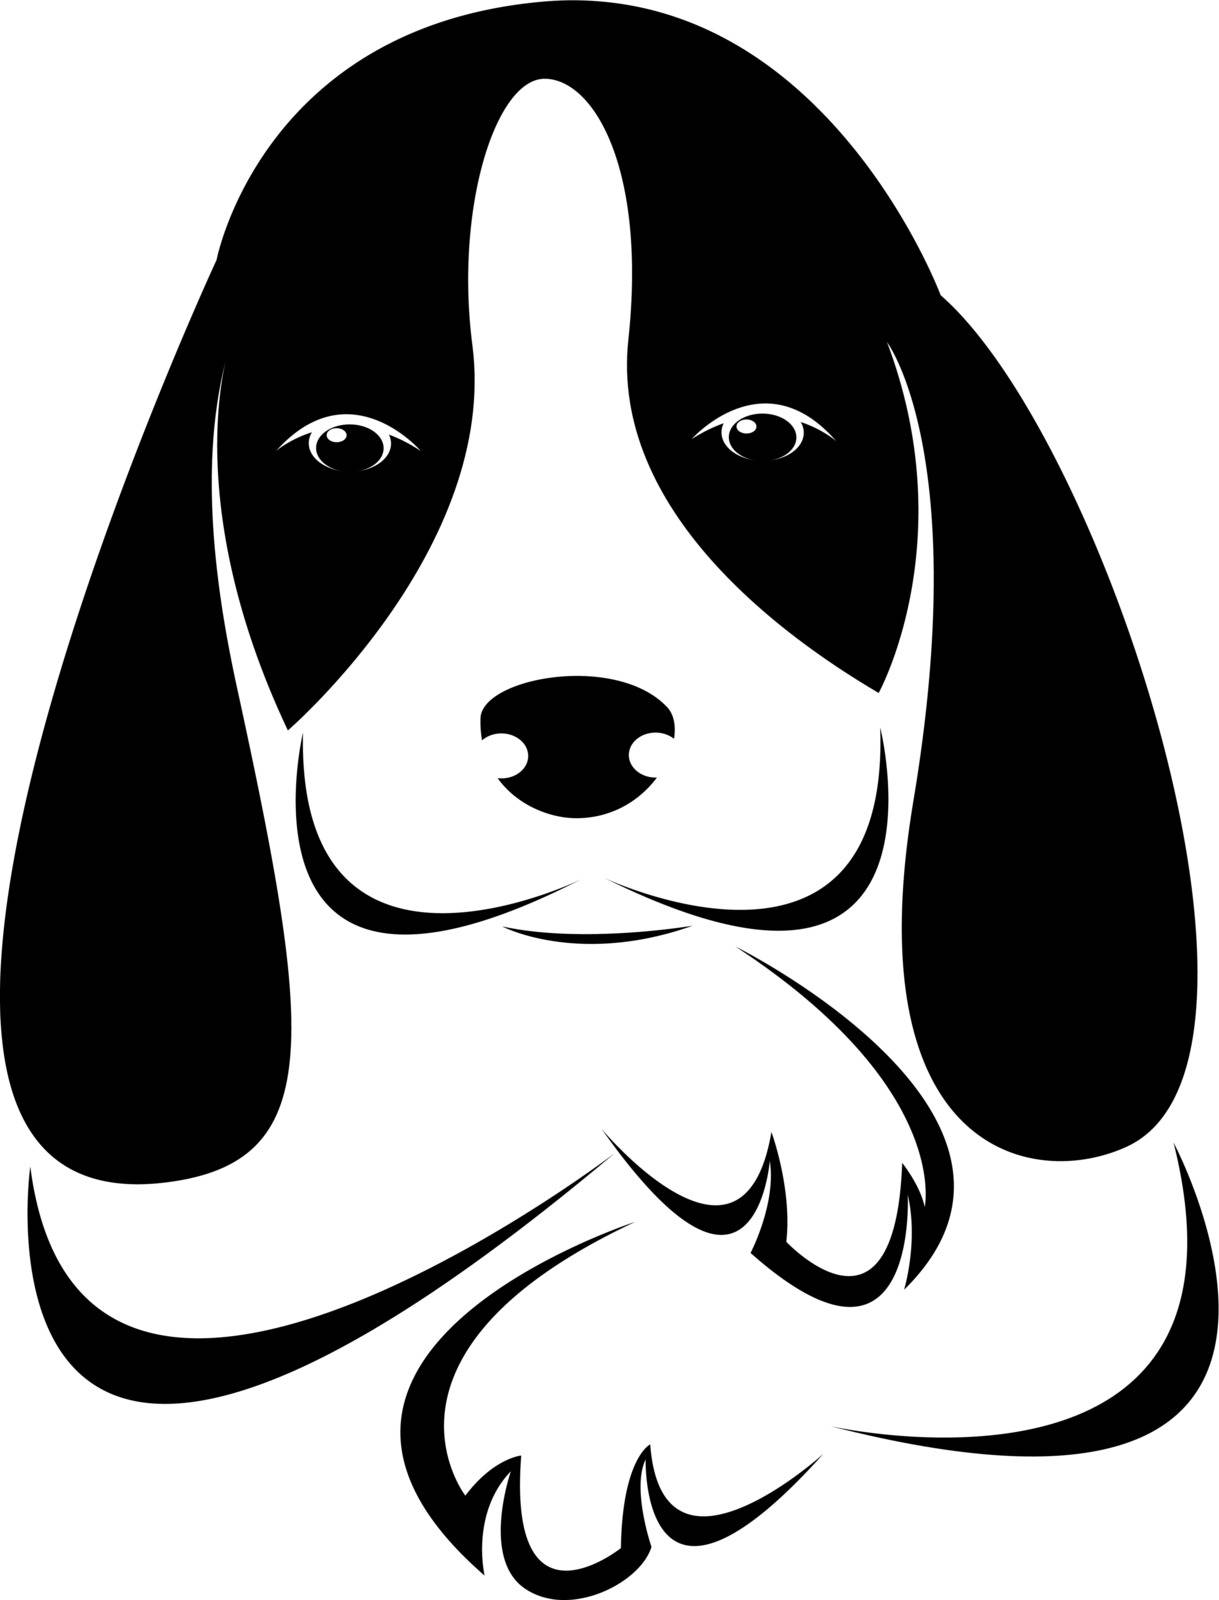 Vector image of an dog by yod67